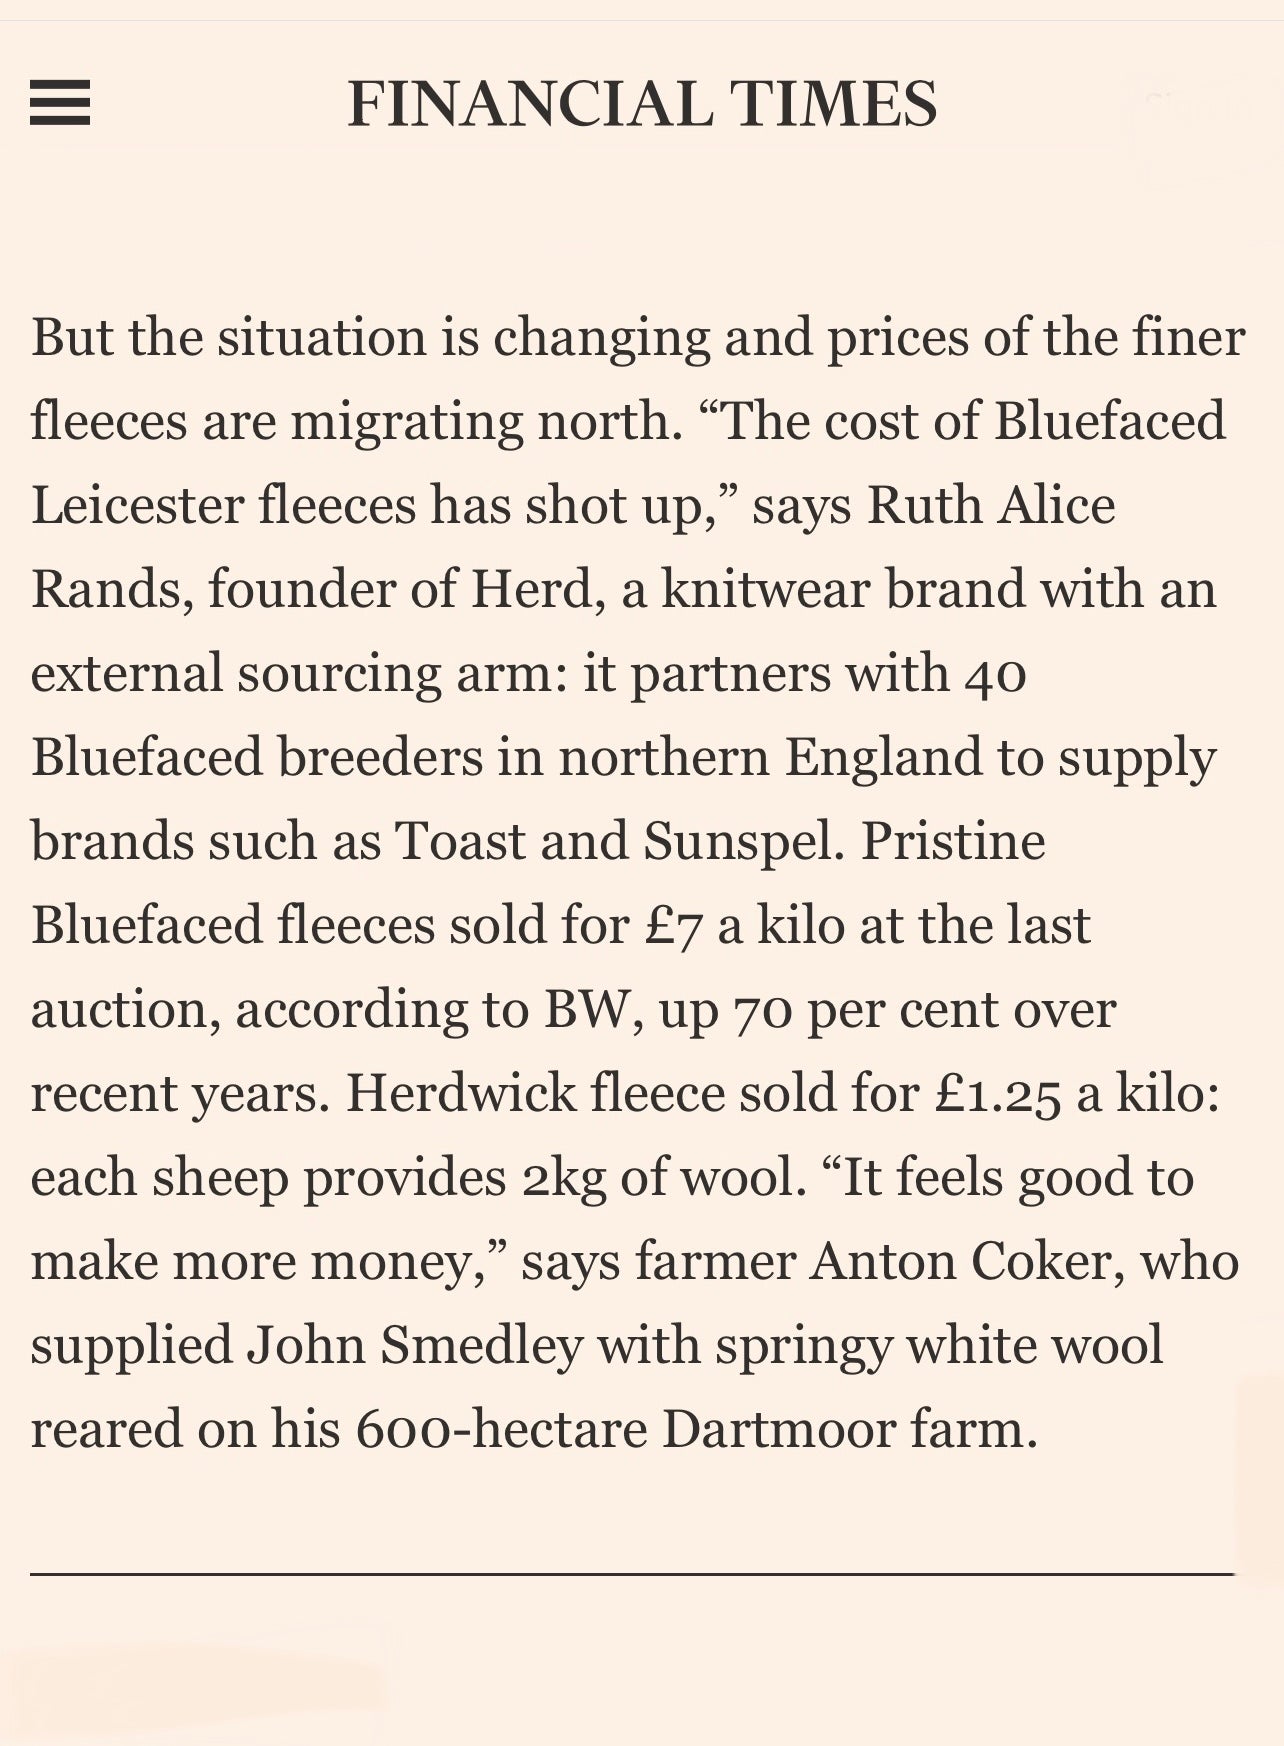 HERD in the FT How To Spend It